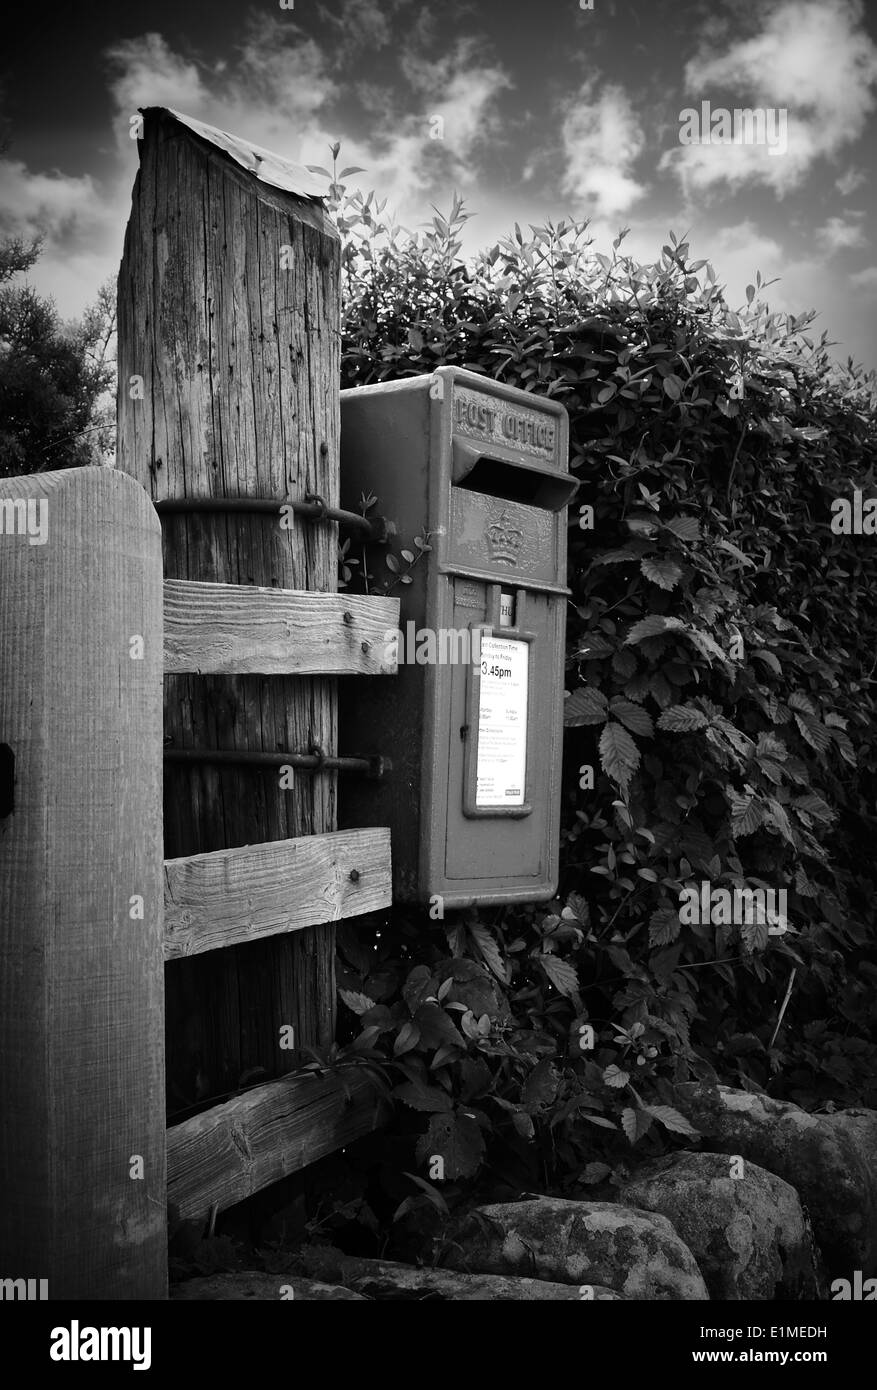 Small royal mail post box attached to a large wooden post in rural setting. Black & white image with dramatic sky Stock Photo